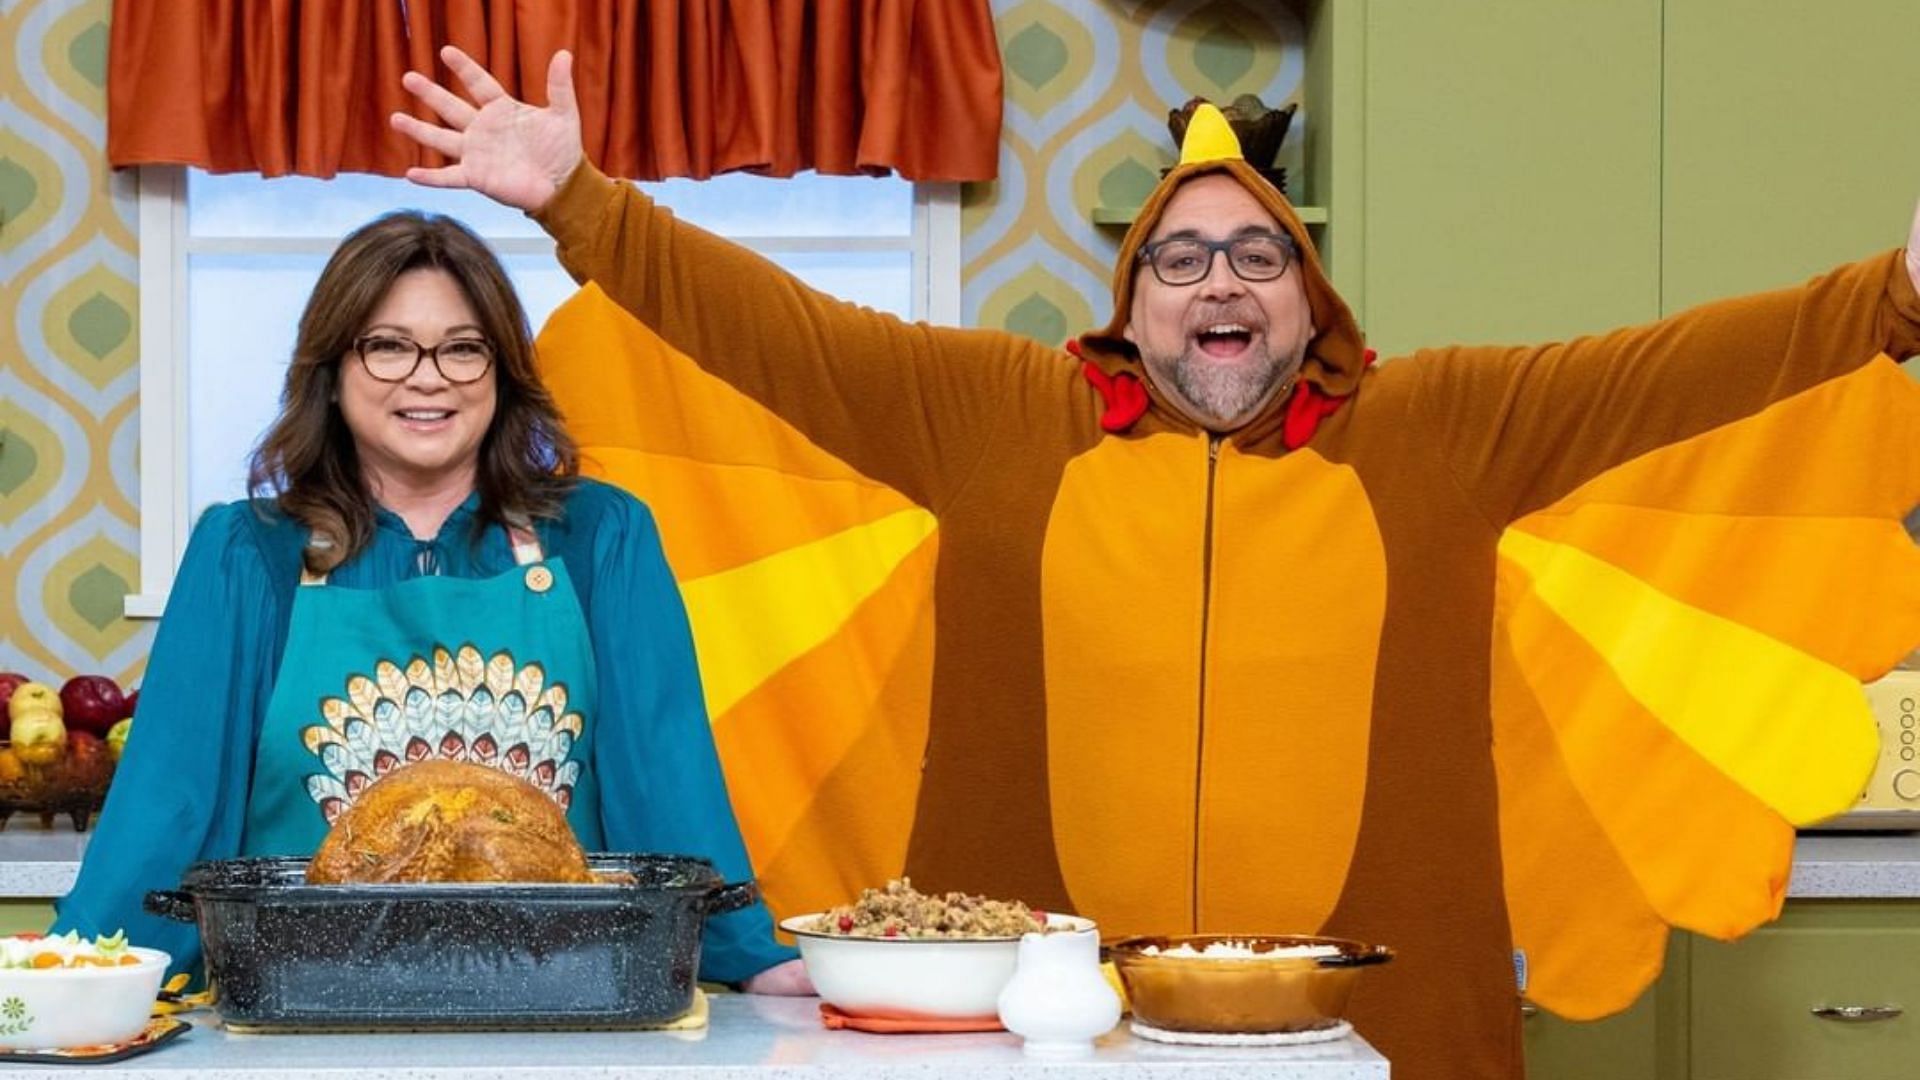 Who are the cohosts of Kids Baking Championship AllStar Holiday